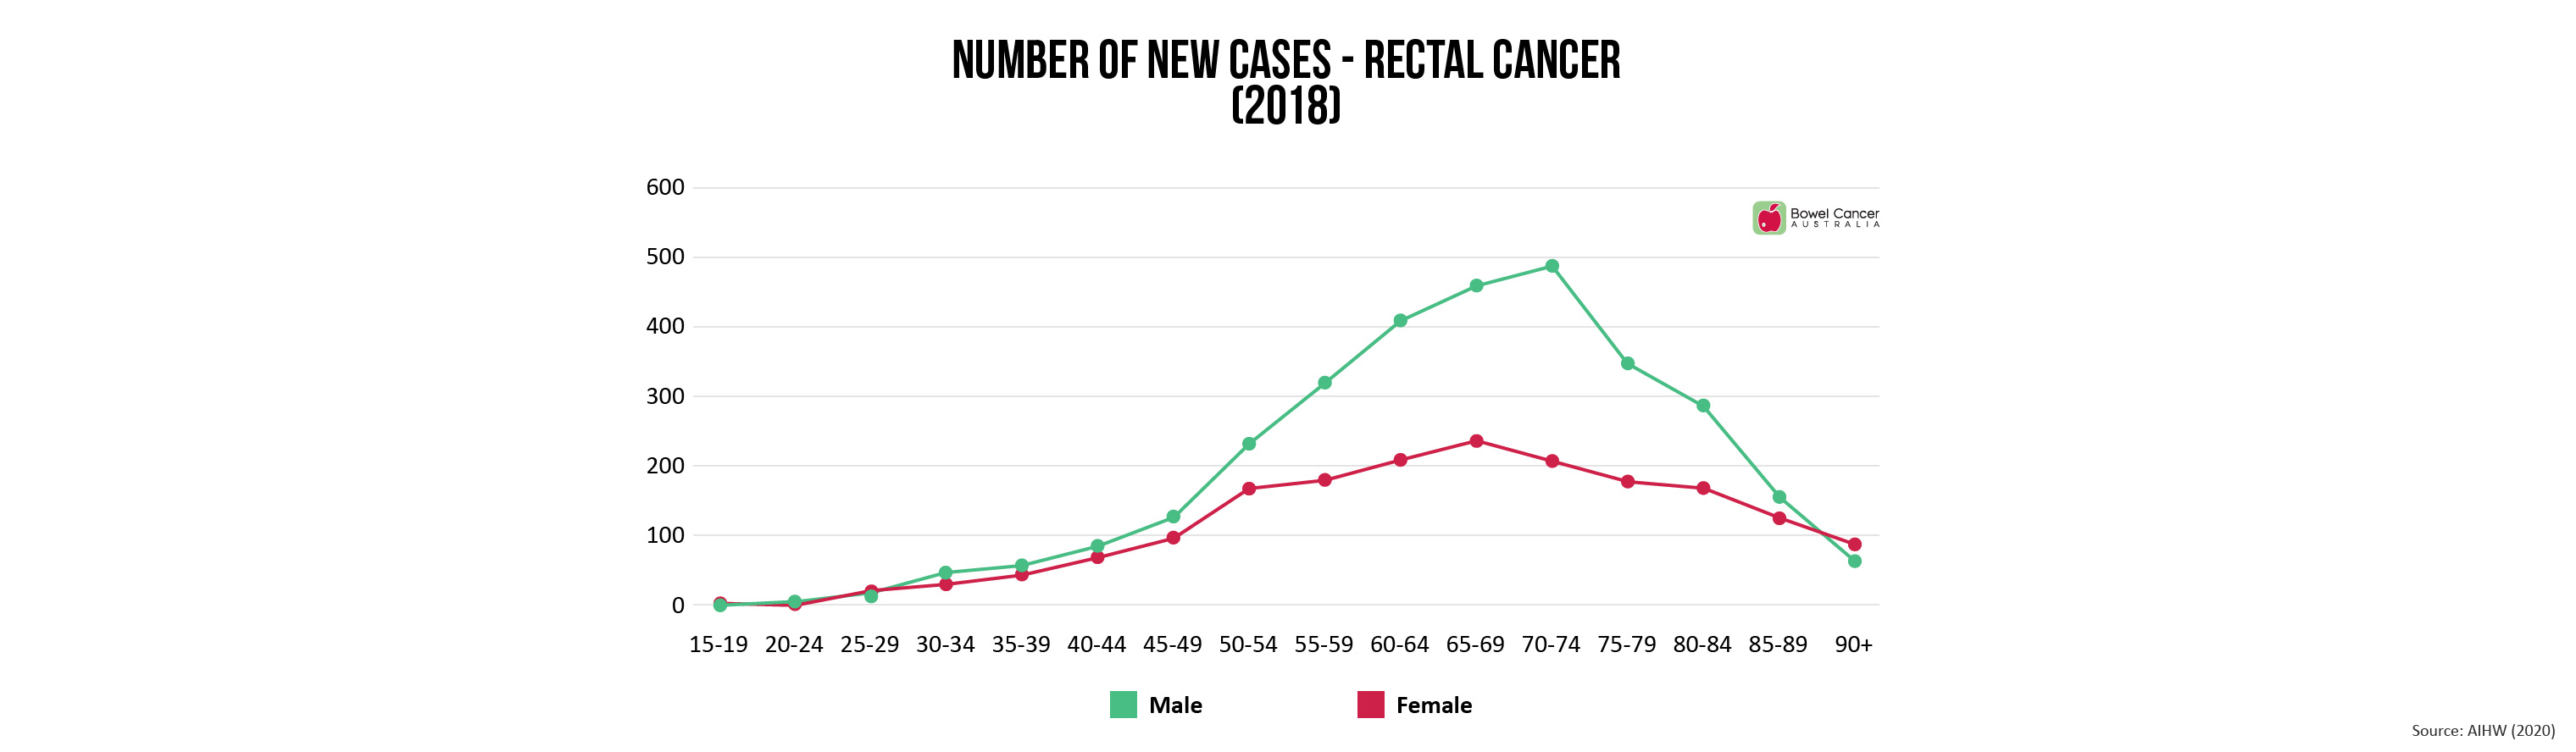 New Cases Rectal Cancer